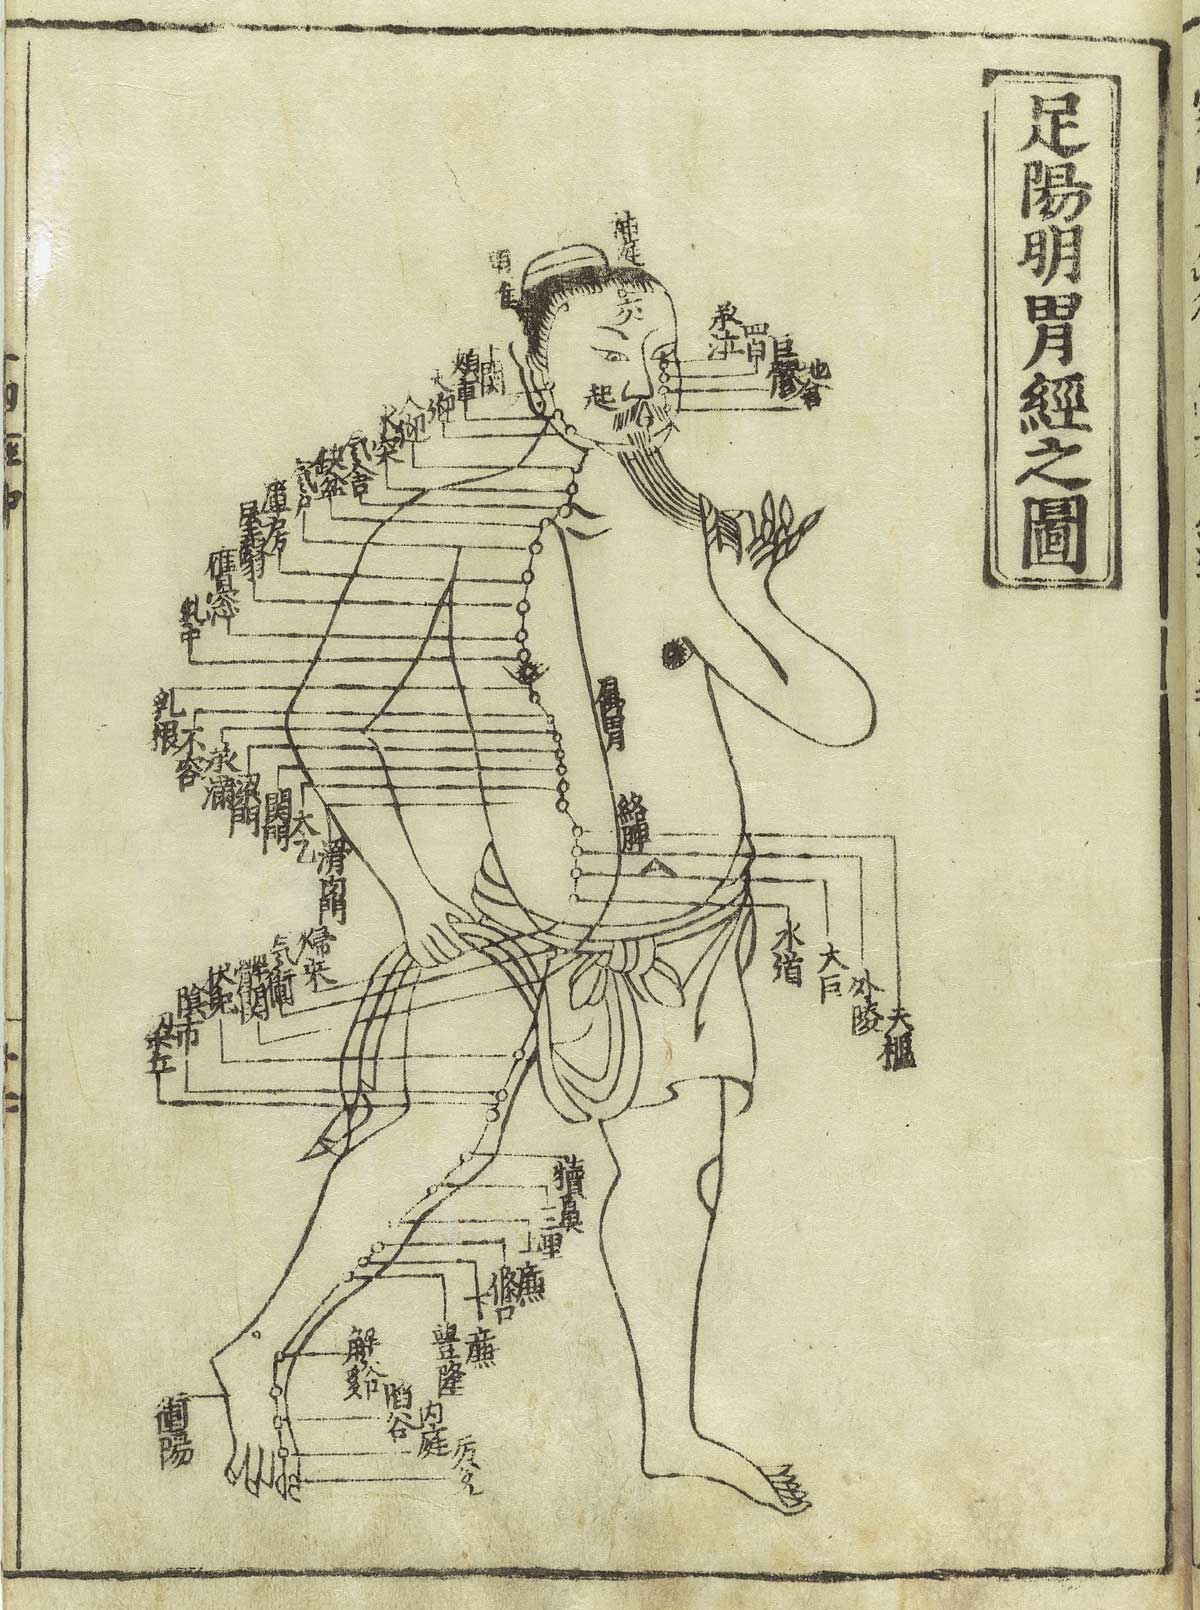 Woodcut showing the Yangming Stomach Meridian of Foot of a standing male facing figure wearing a loin cloth with meridians indicated down the chest and leg with Chinese characters giving names of the points, from Hua Shou’s Jushikei hakki, NLM Call no.: WZ 260 H868s 1716.